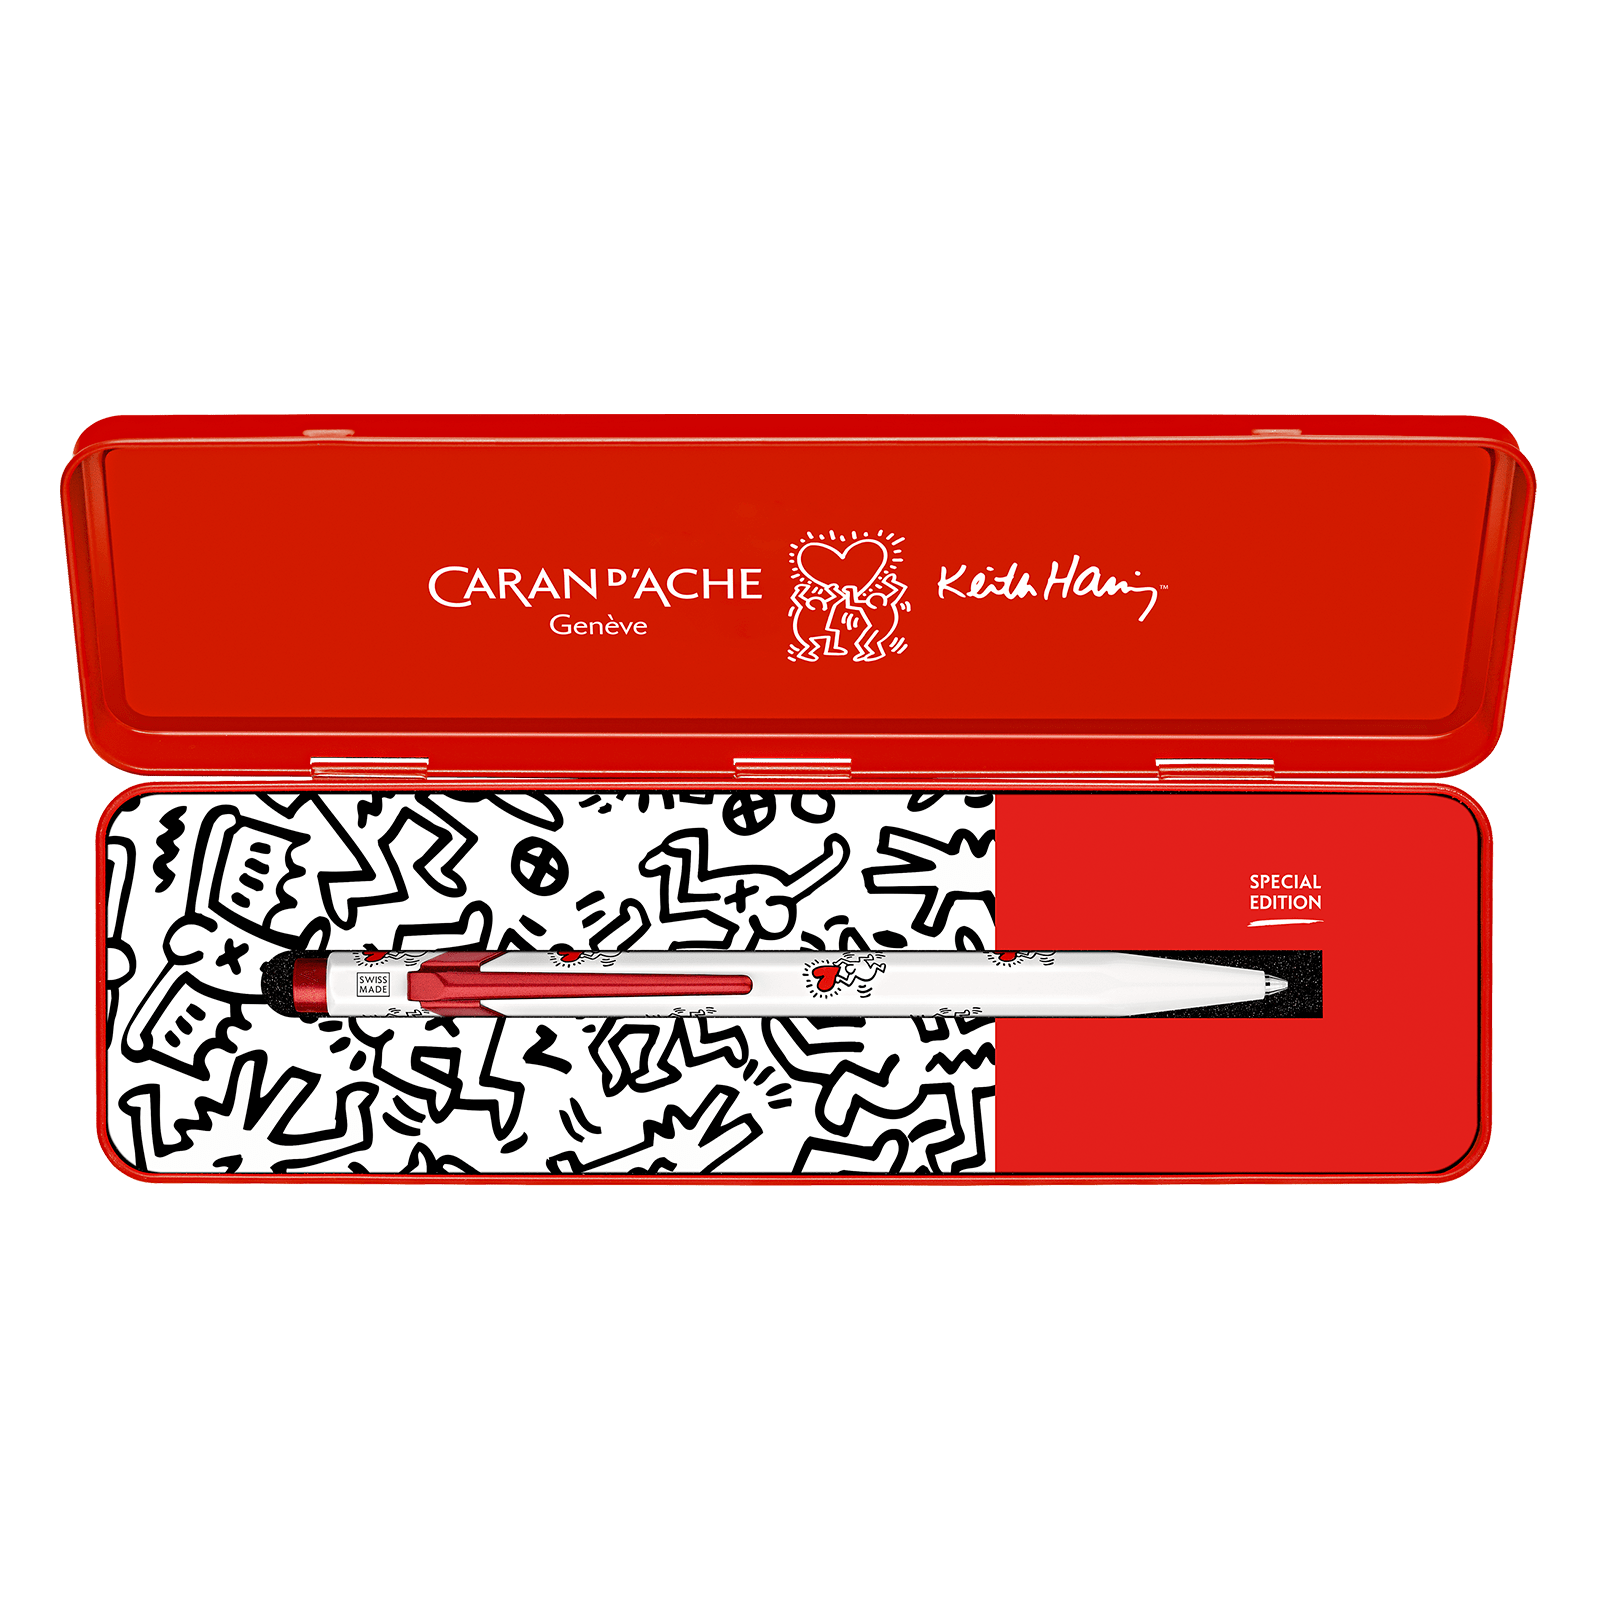 Caran D'Ache + Keith Haring 849 Special Edition White Ballpoint - Pencraft the boutique